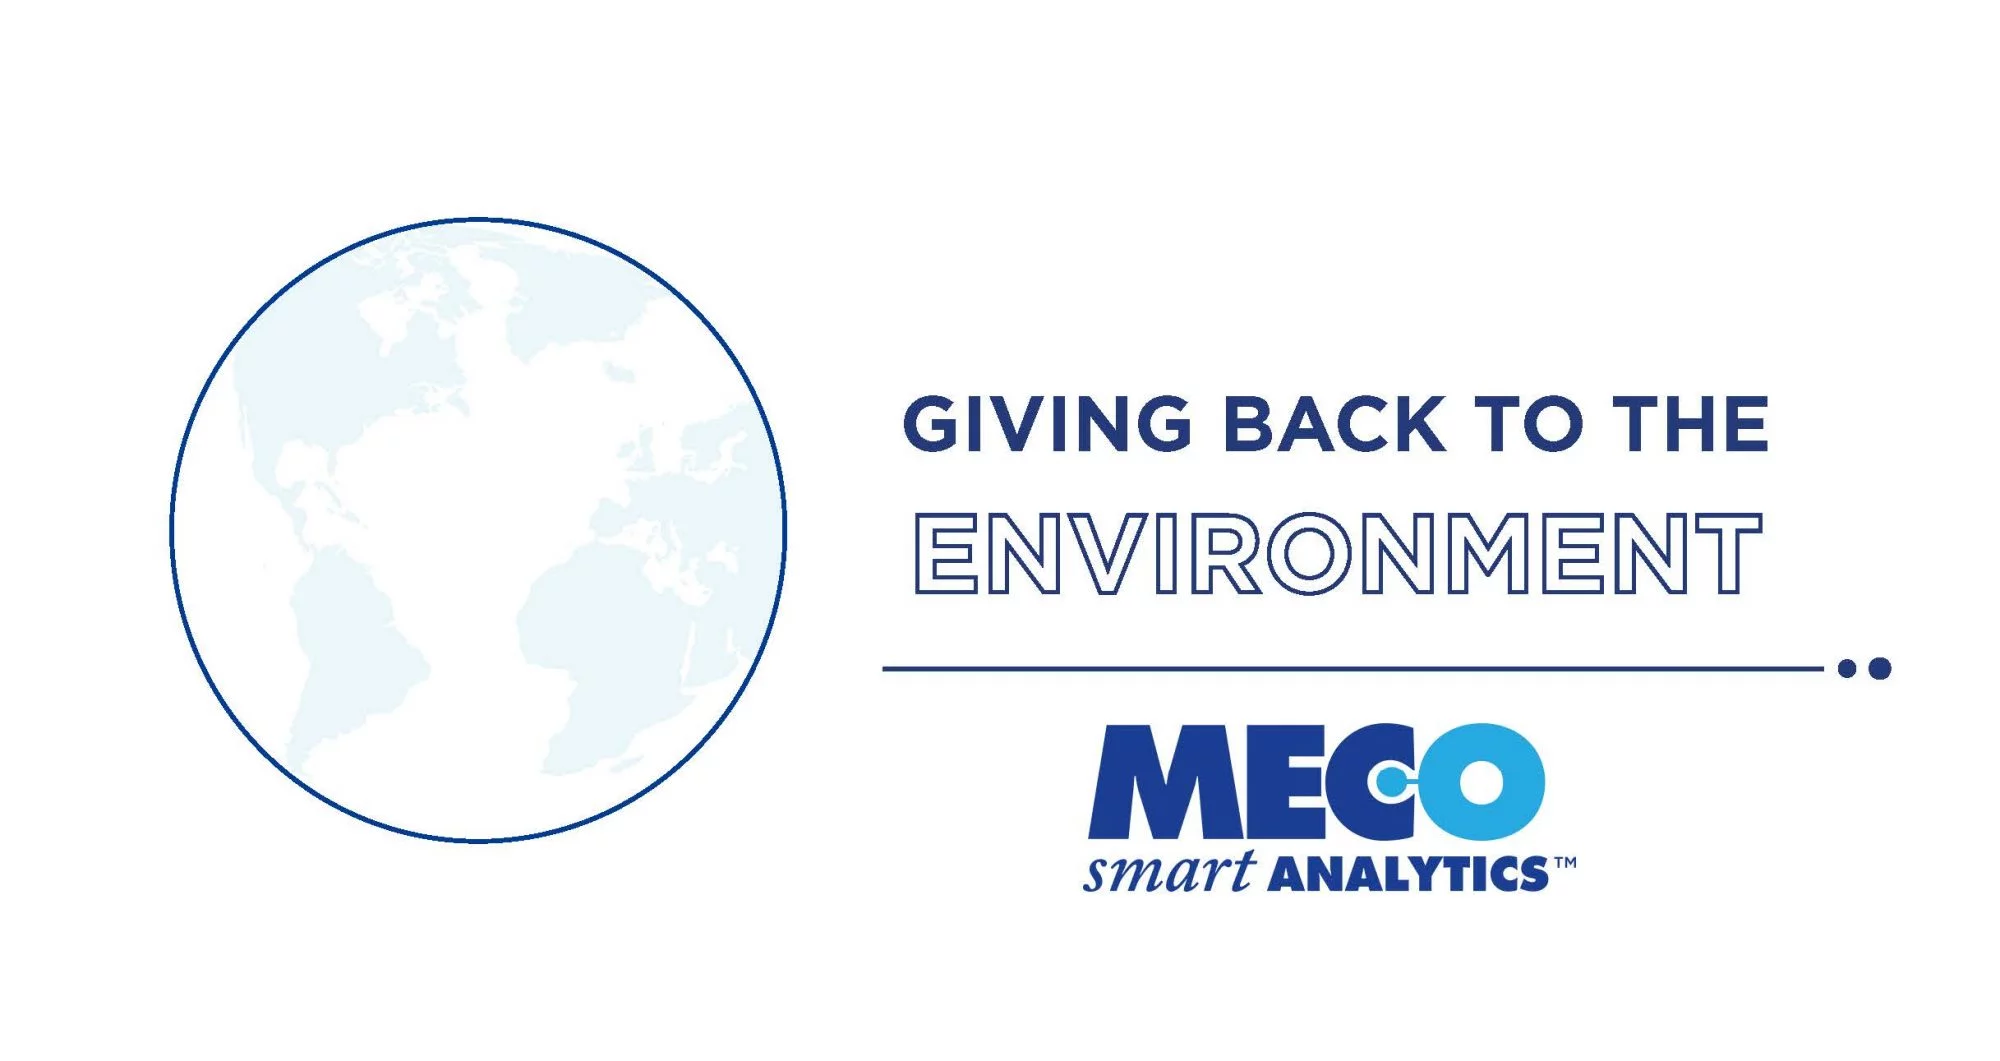 MECO SmartAnalytics gives back to the environment